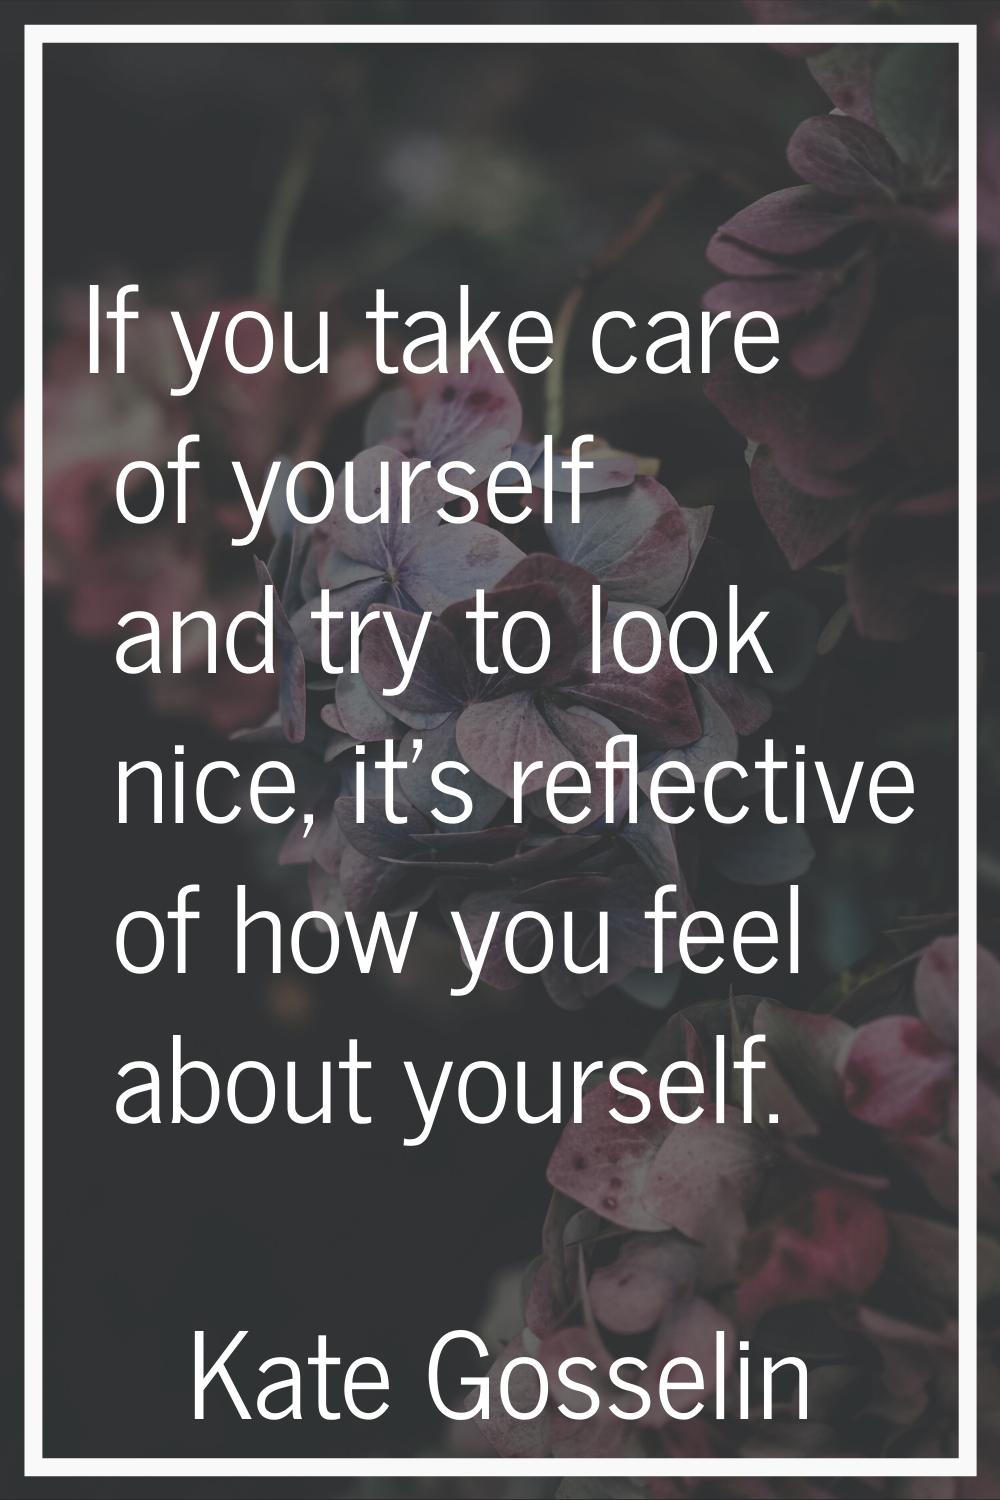 If you take care of yourself and try to look nice, it's reflective of how you feel about yourself.